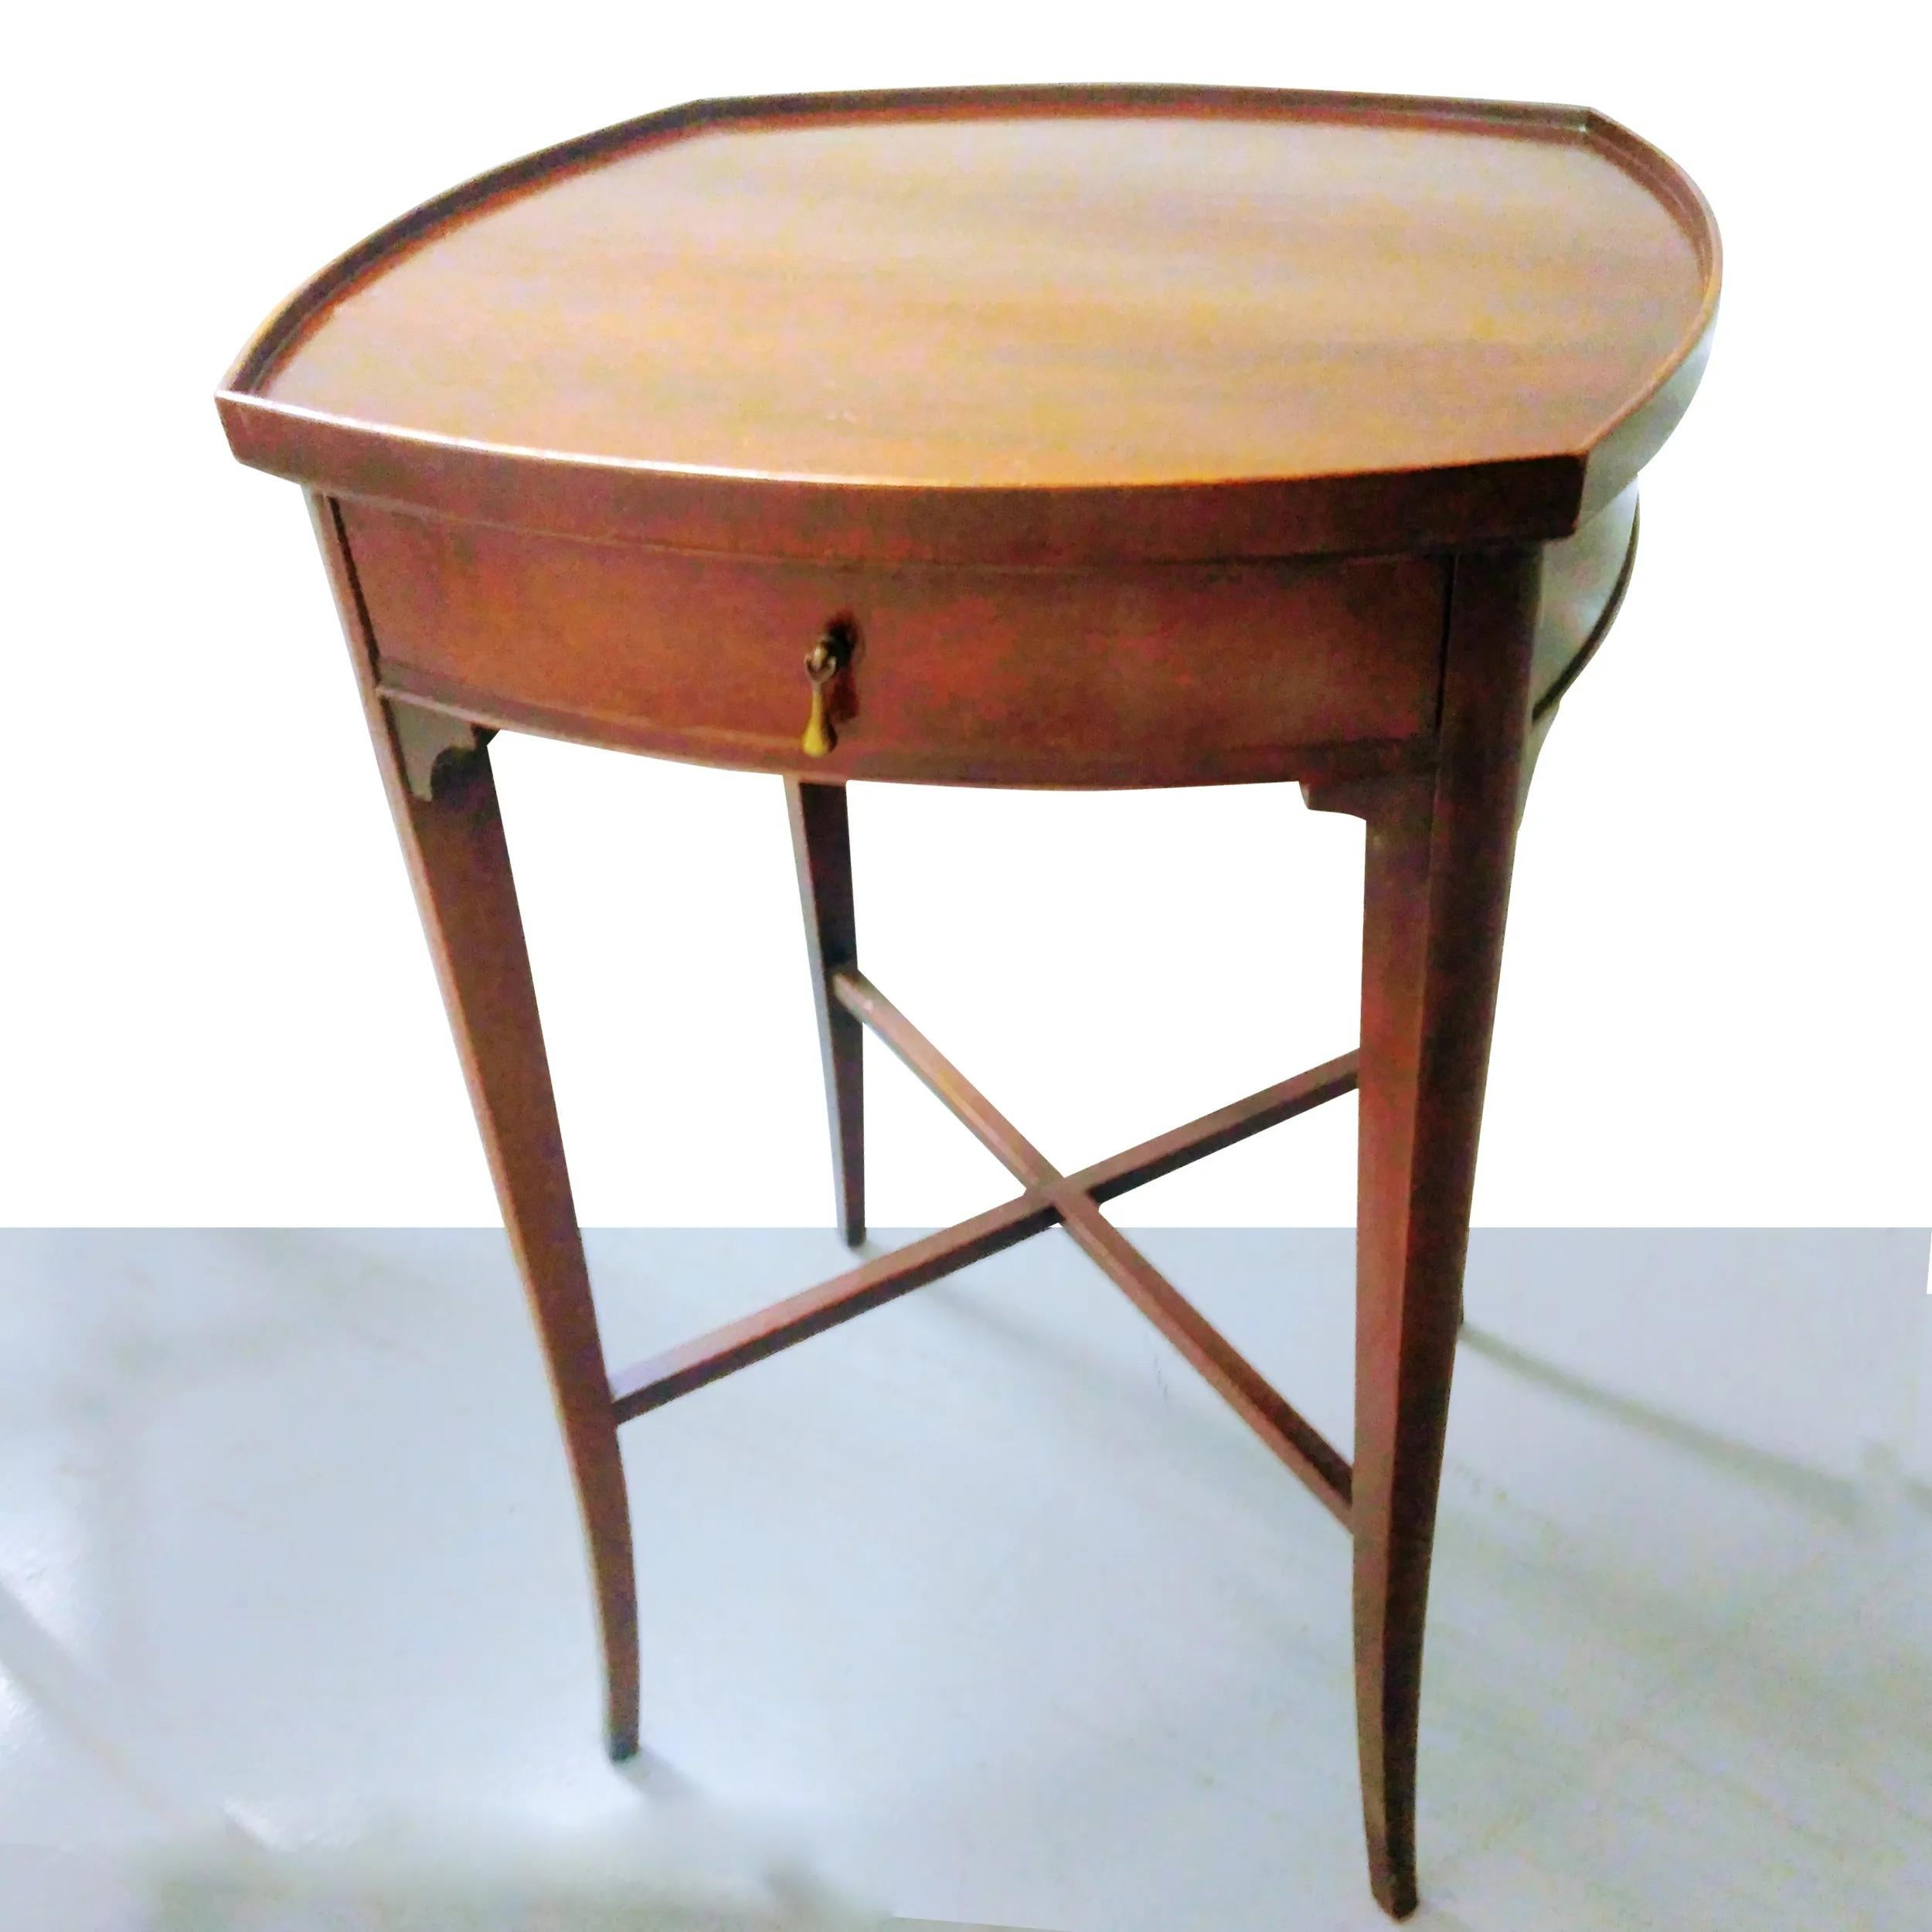 Pair of Sheraton Style Side Tables

Elegant pair of side tables or nightstands in the antique Sheraton style dating from the early 20th century.

Features one drawer each with bronze pulls and elegant tapered legs.

Age appropriate wear.